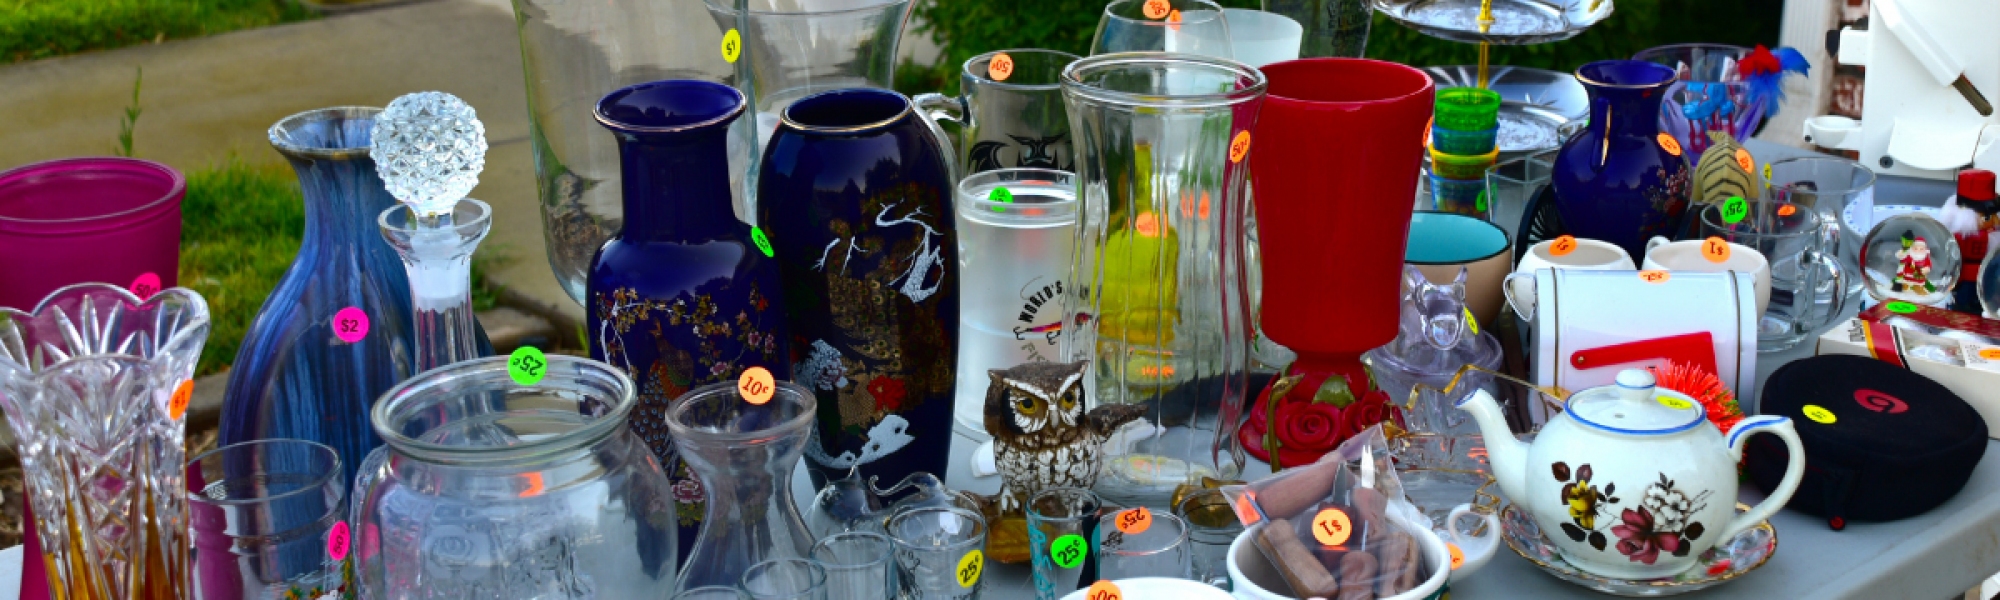 vases and glassware on a table with price stickers at a yard sale